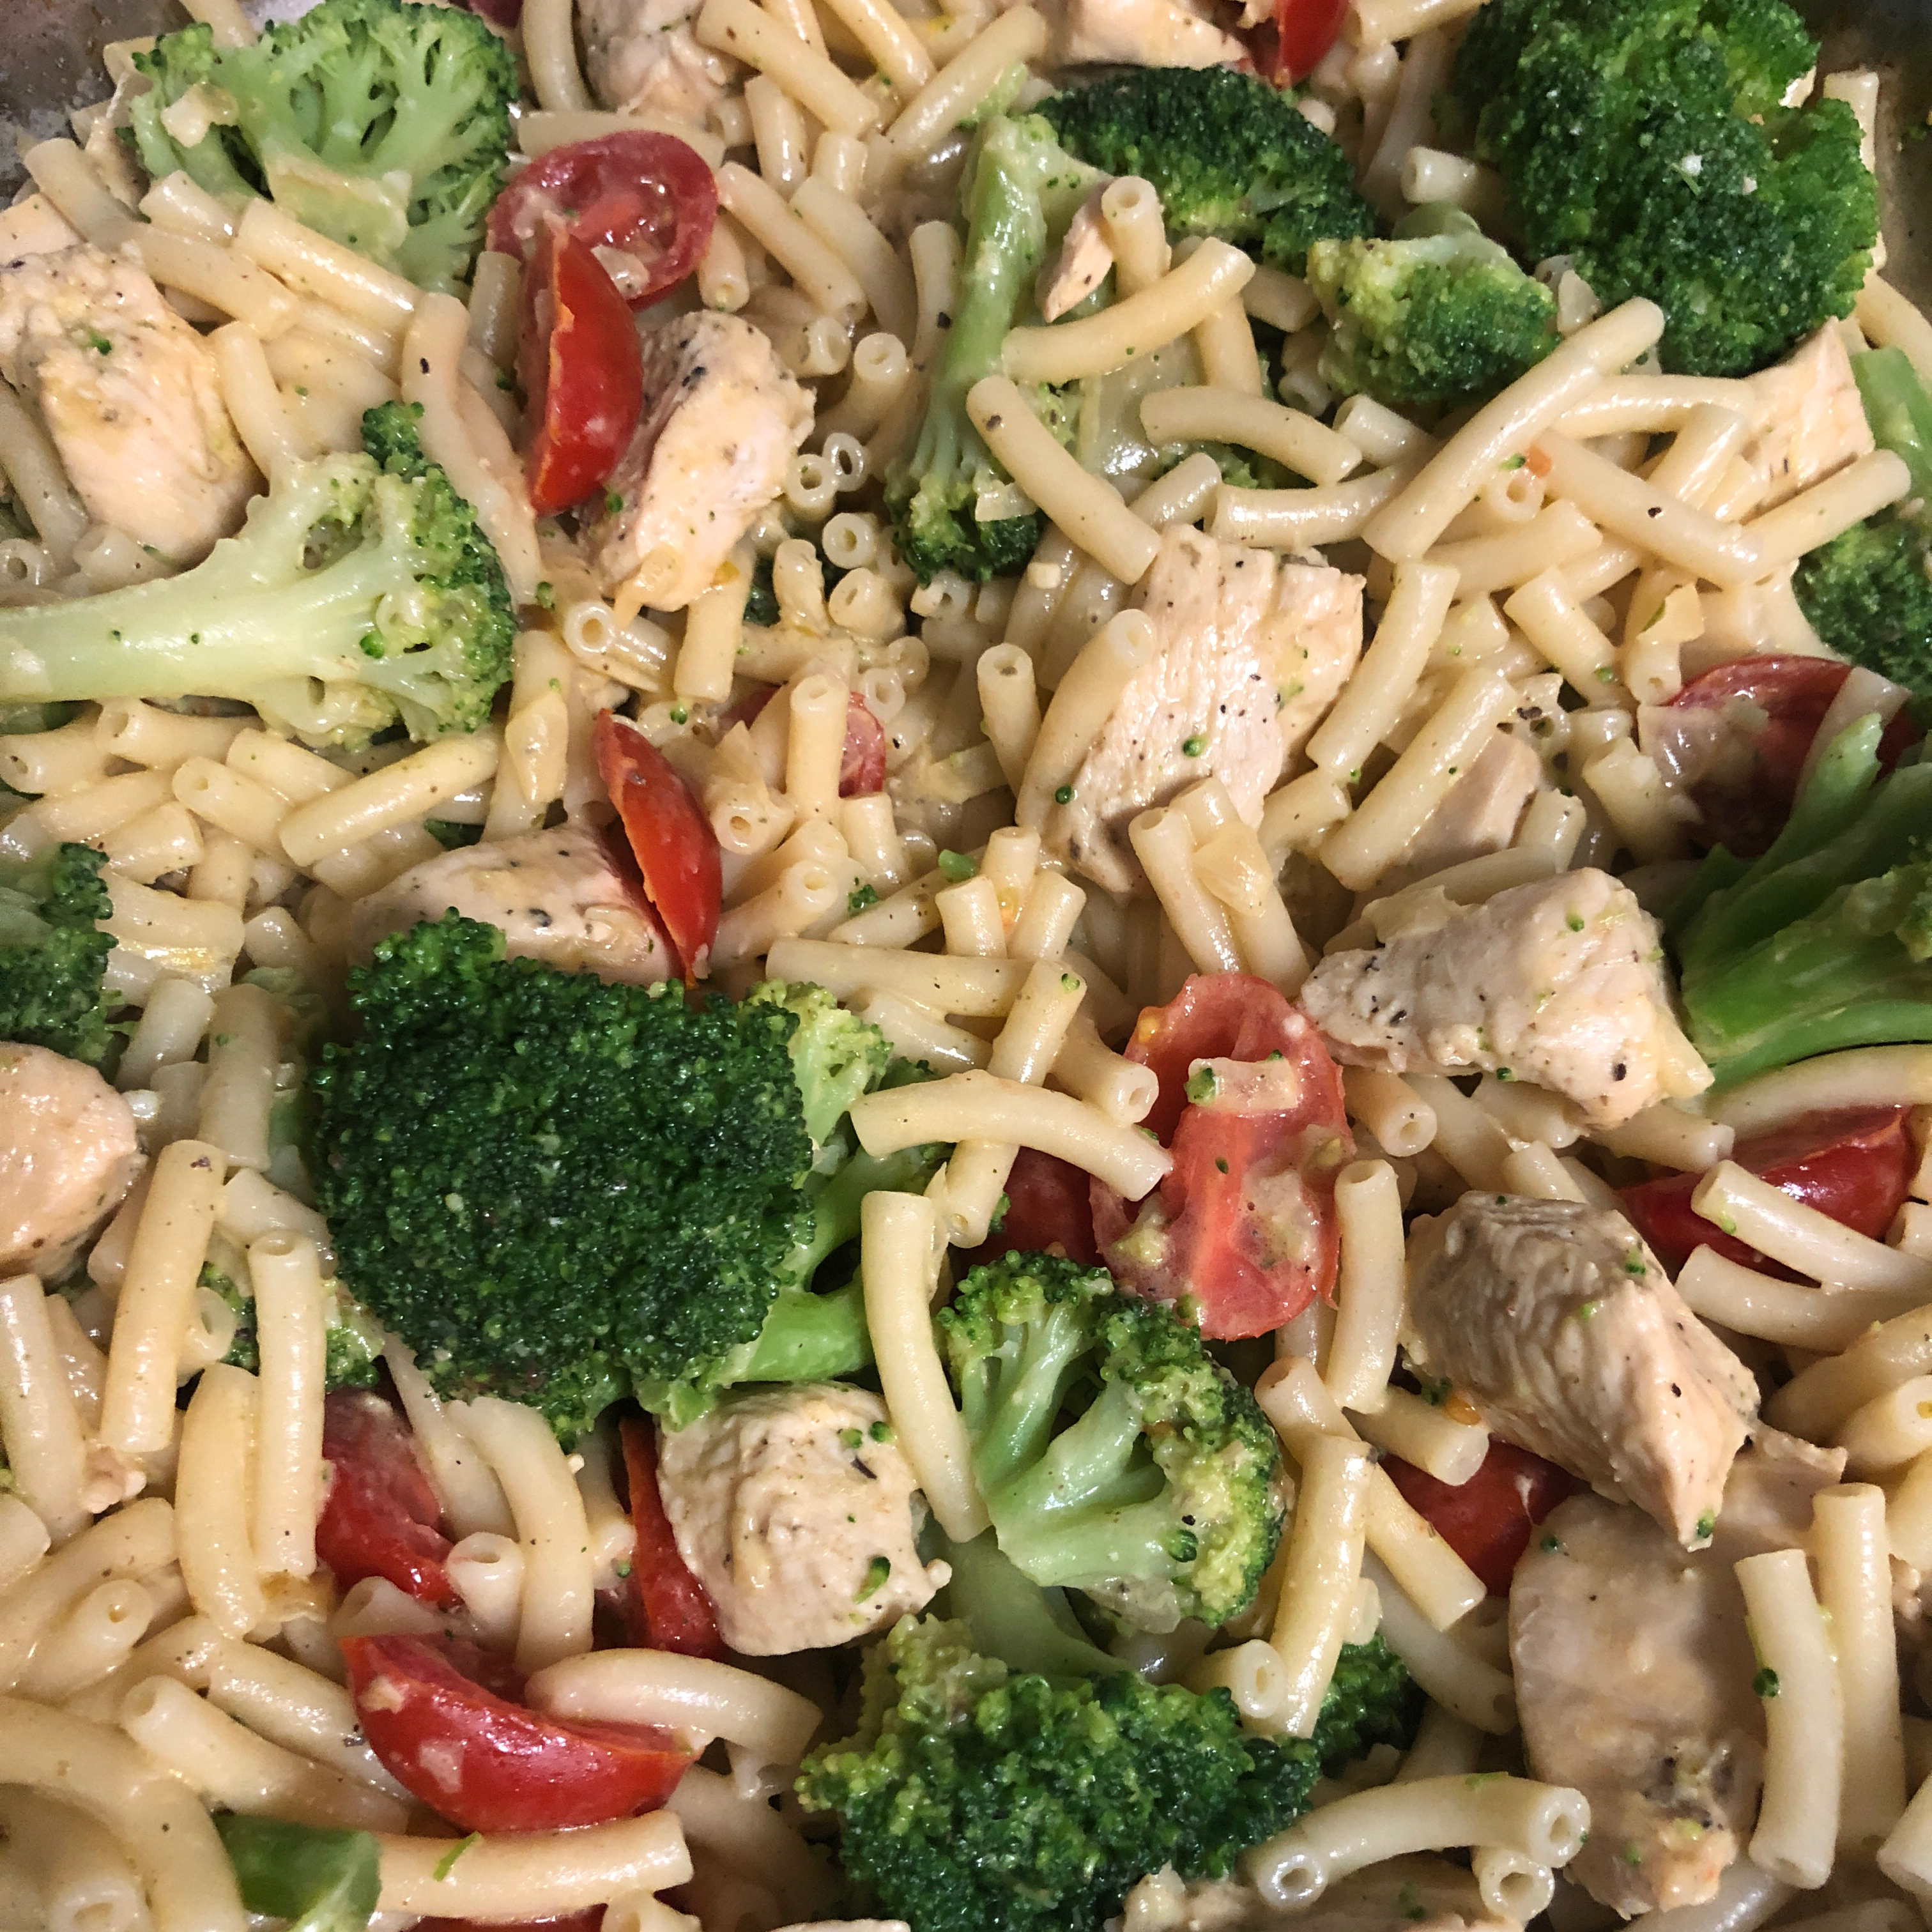 Macaroni and Cheese with Chicken and Broccoli